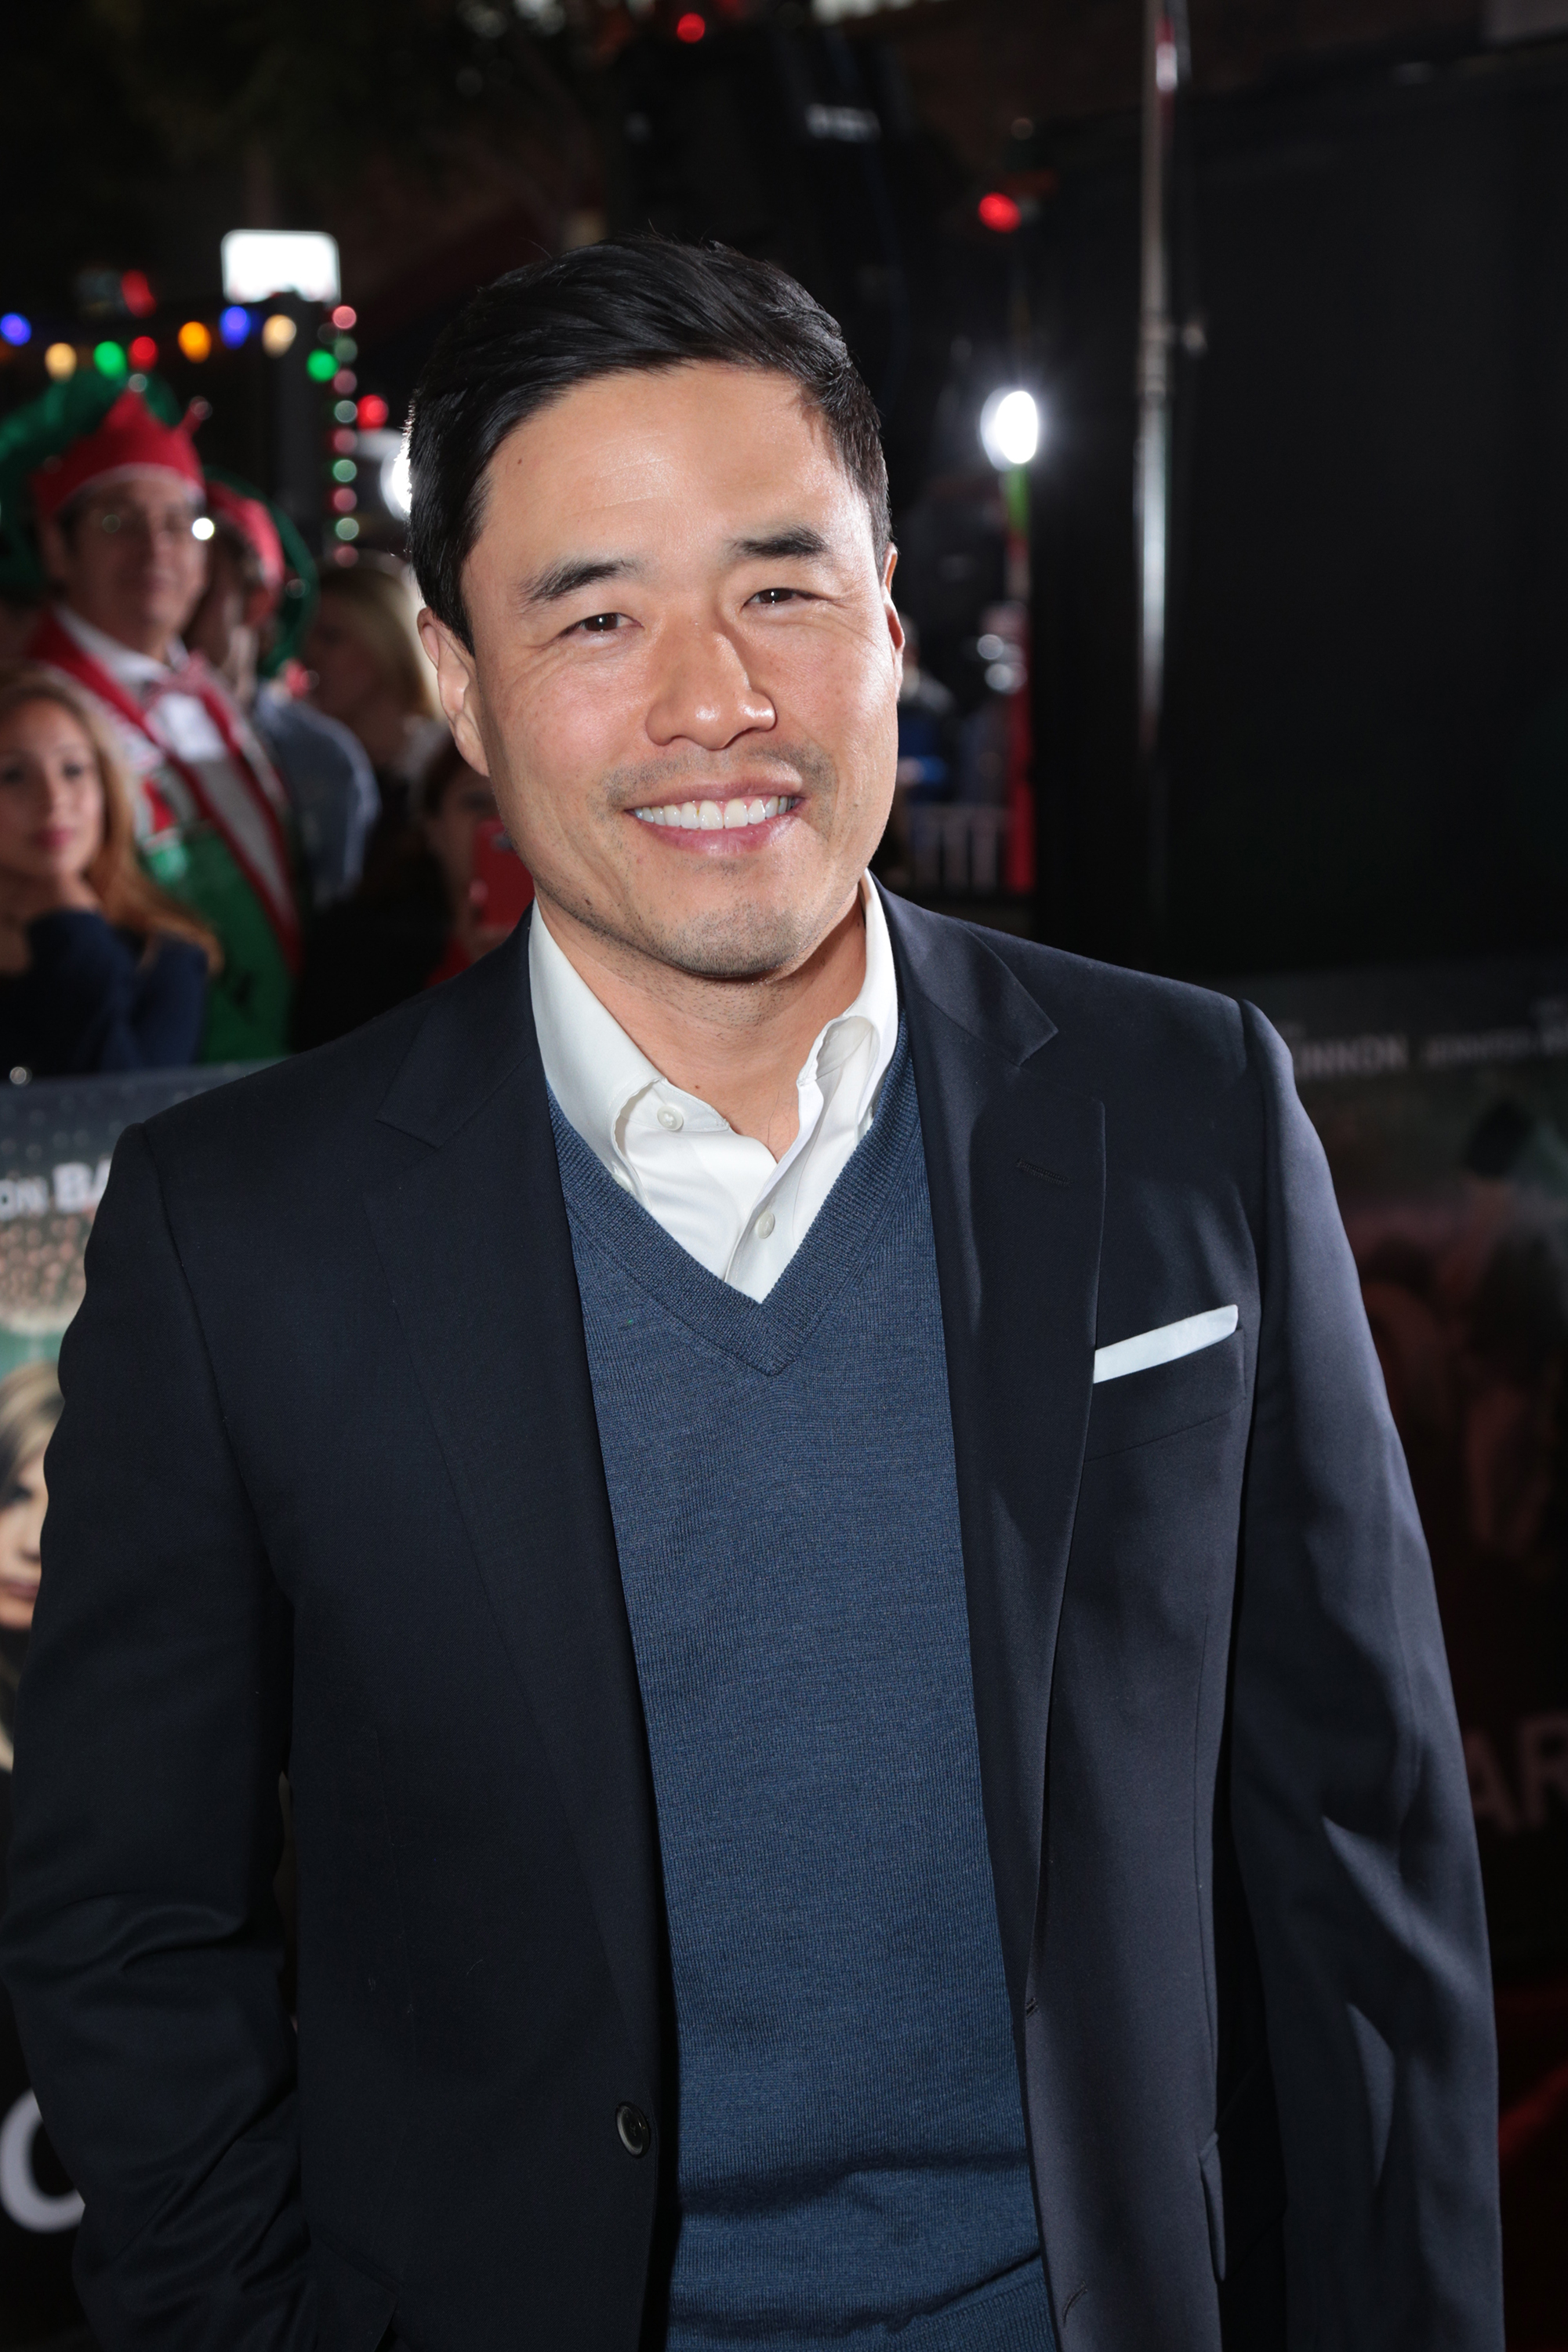 Randall Park poses as Paramount Pictures presents the Los Angeles premiere of "Office Christmas Party" at the Regency Village Theater in Los Angeles, CA on Wednesday, December 7, 2016  (Photo: Alex J. Berliner / ABImages)